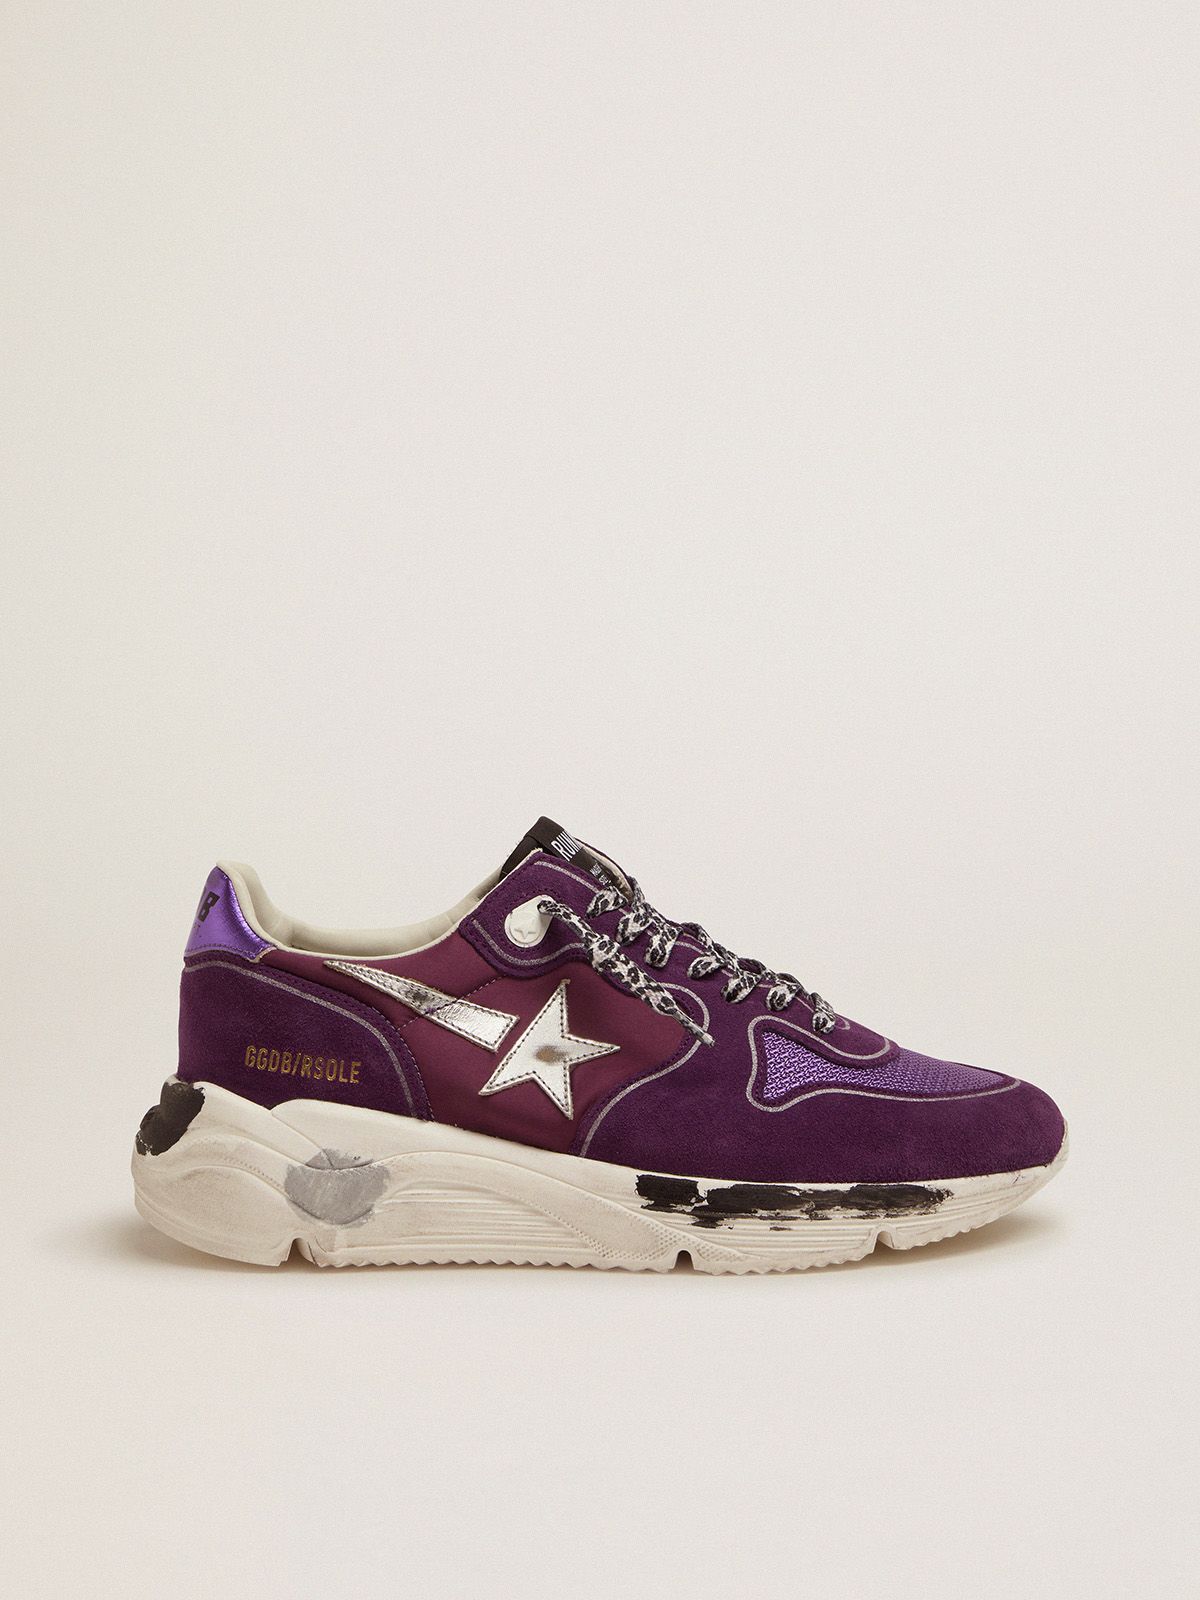 golden goose leather Sole purple Running with heel and mesh Suede, sneakers metallic tab